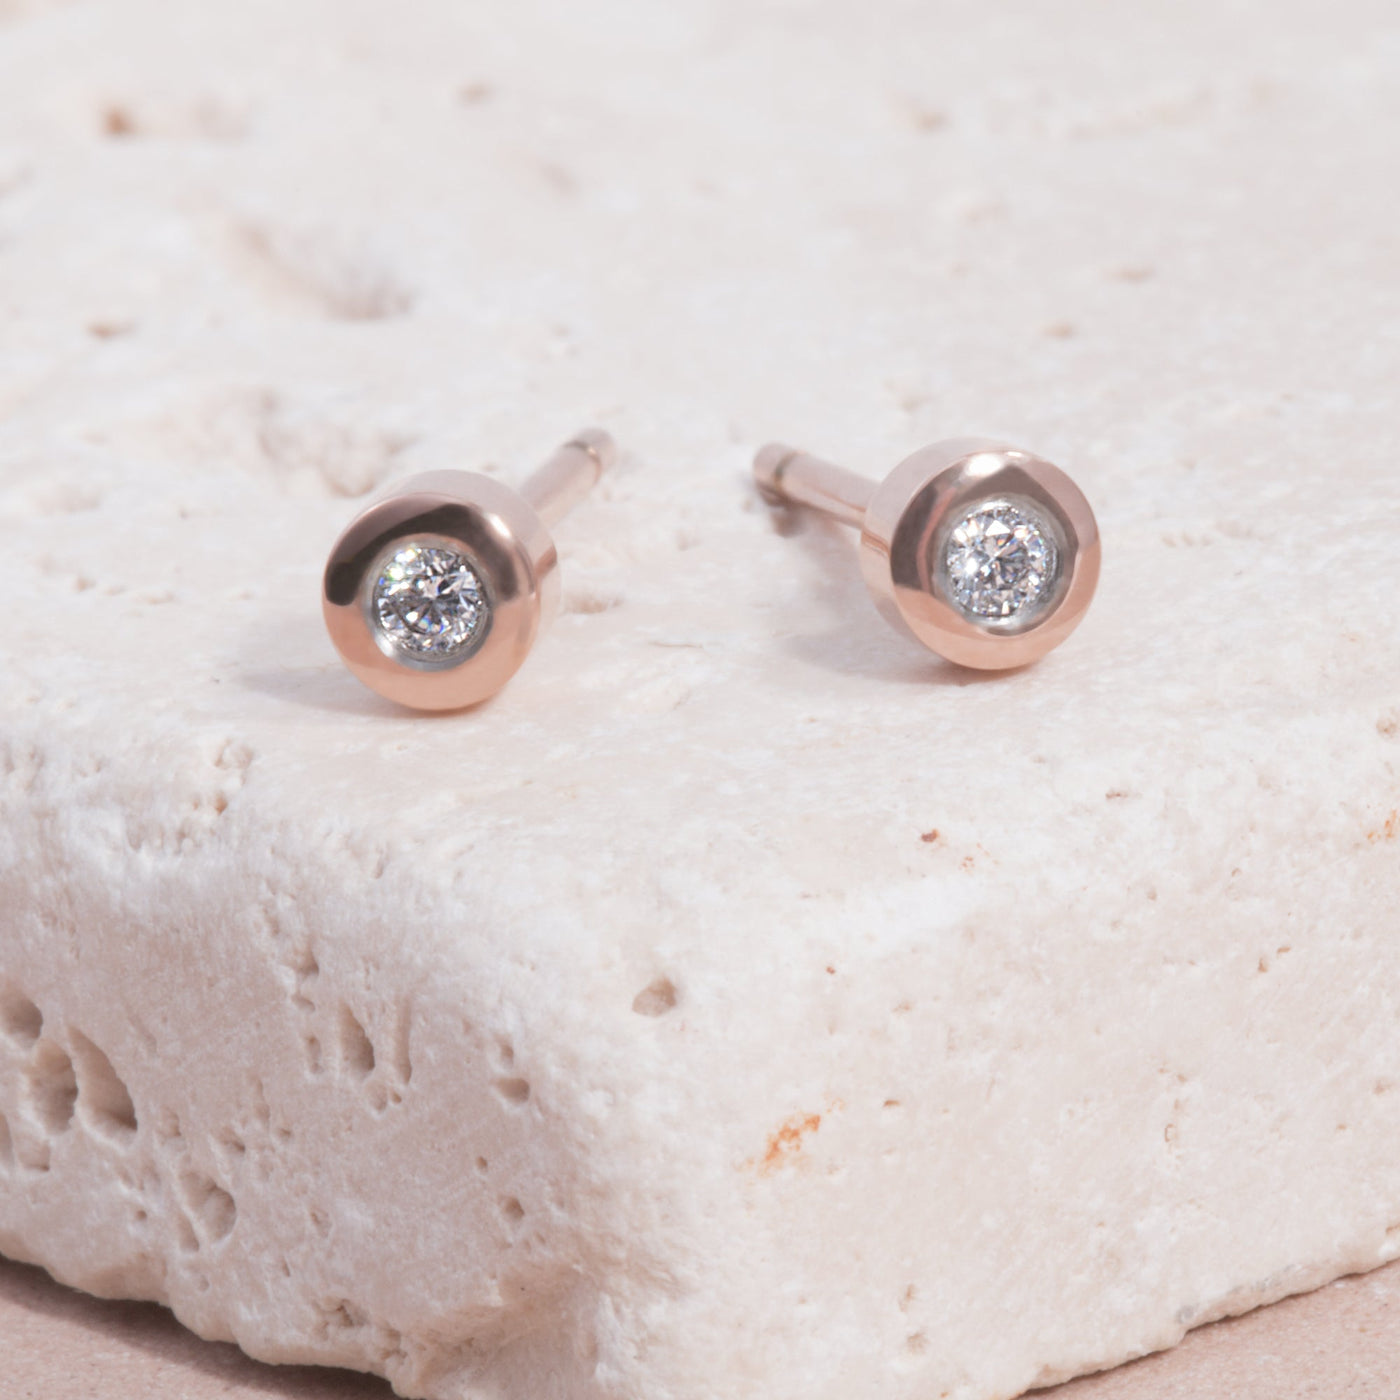 Stainless 3mm round stone stud earrings by Mia Bijoux